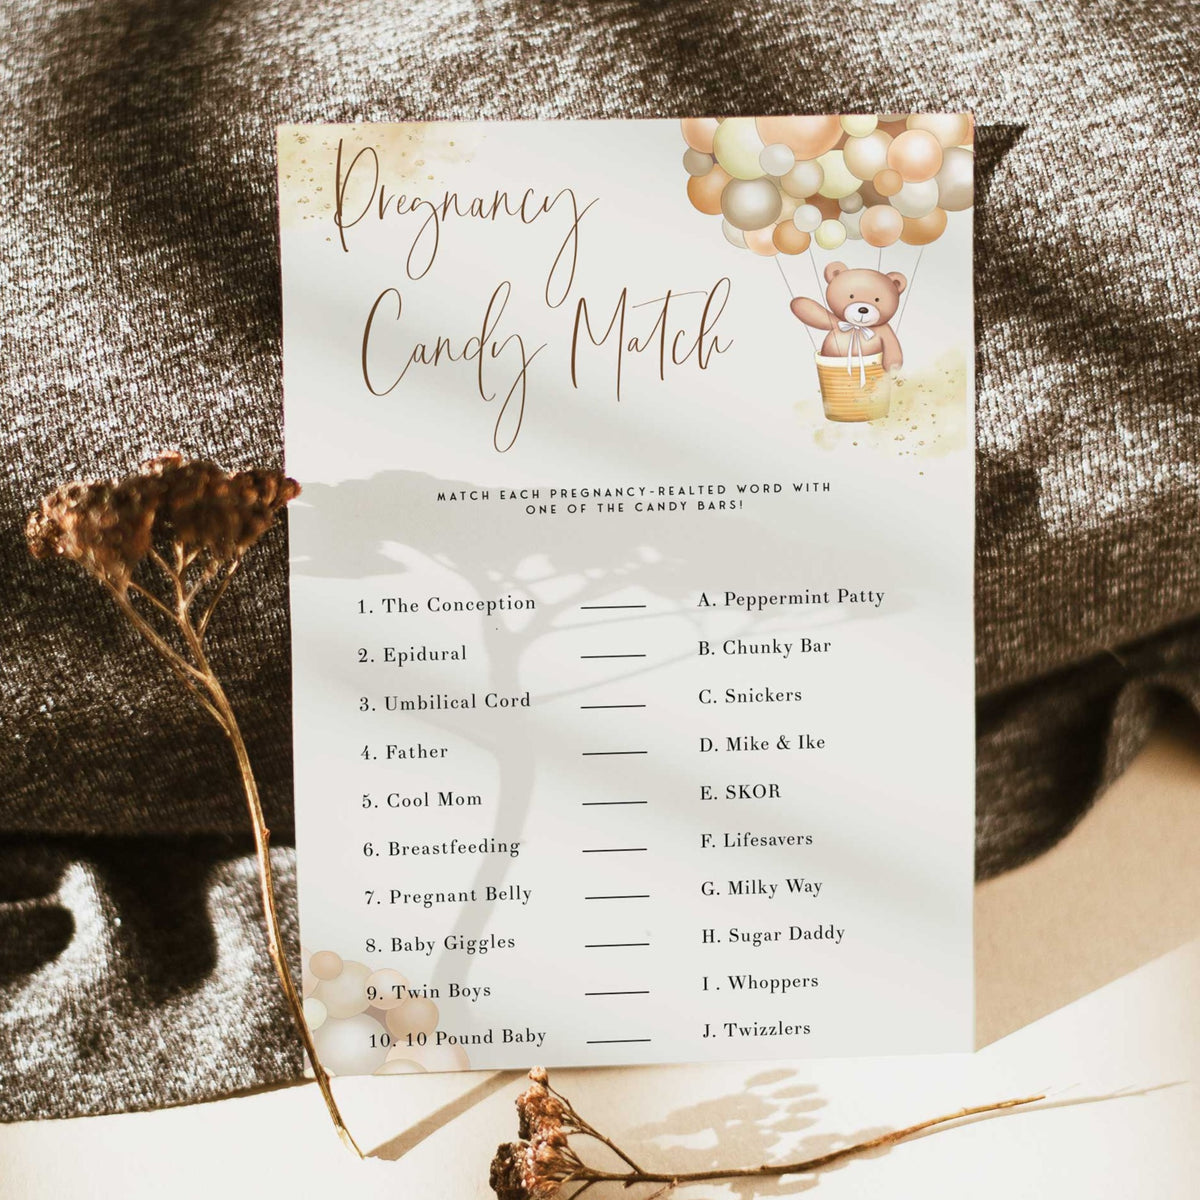 Fully editable and printable baby shower pregnancy candy match game with a hot air balloon teddy bear, we can bearly wait design. Perfect for a We Can Bearly Wait baby shower themed party